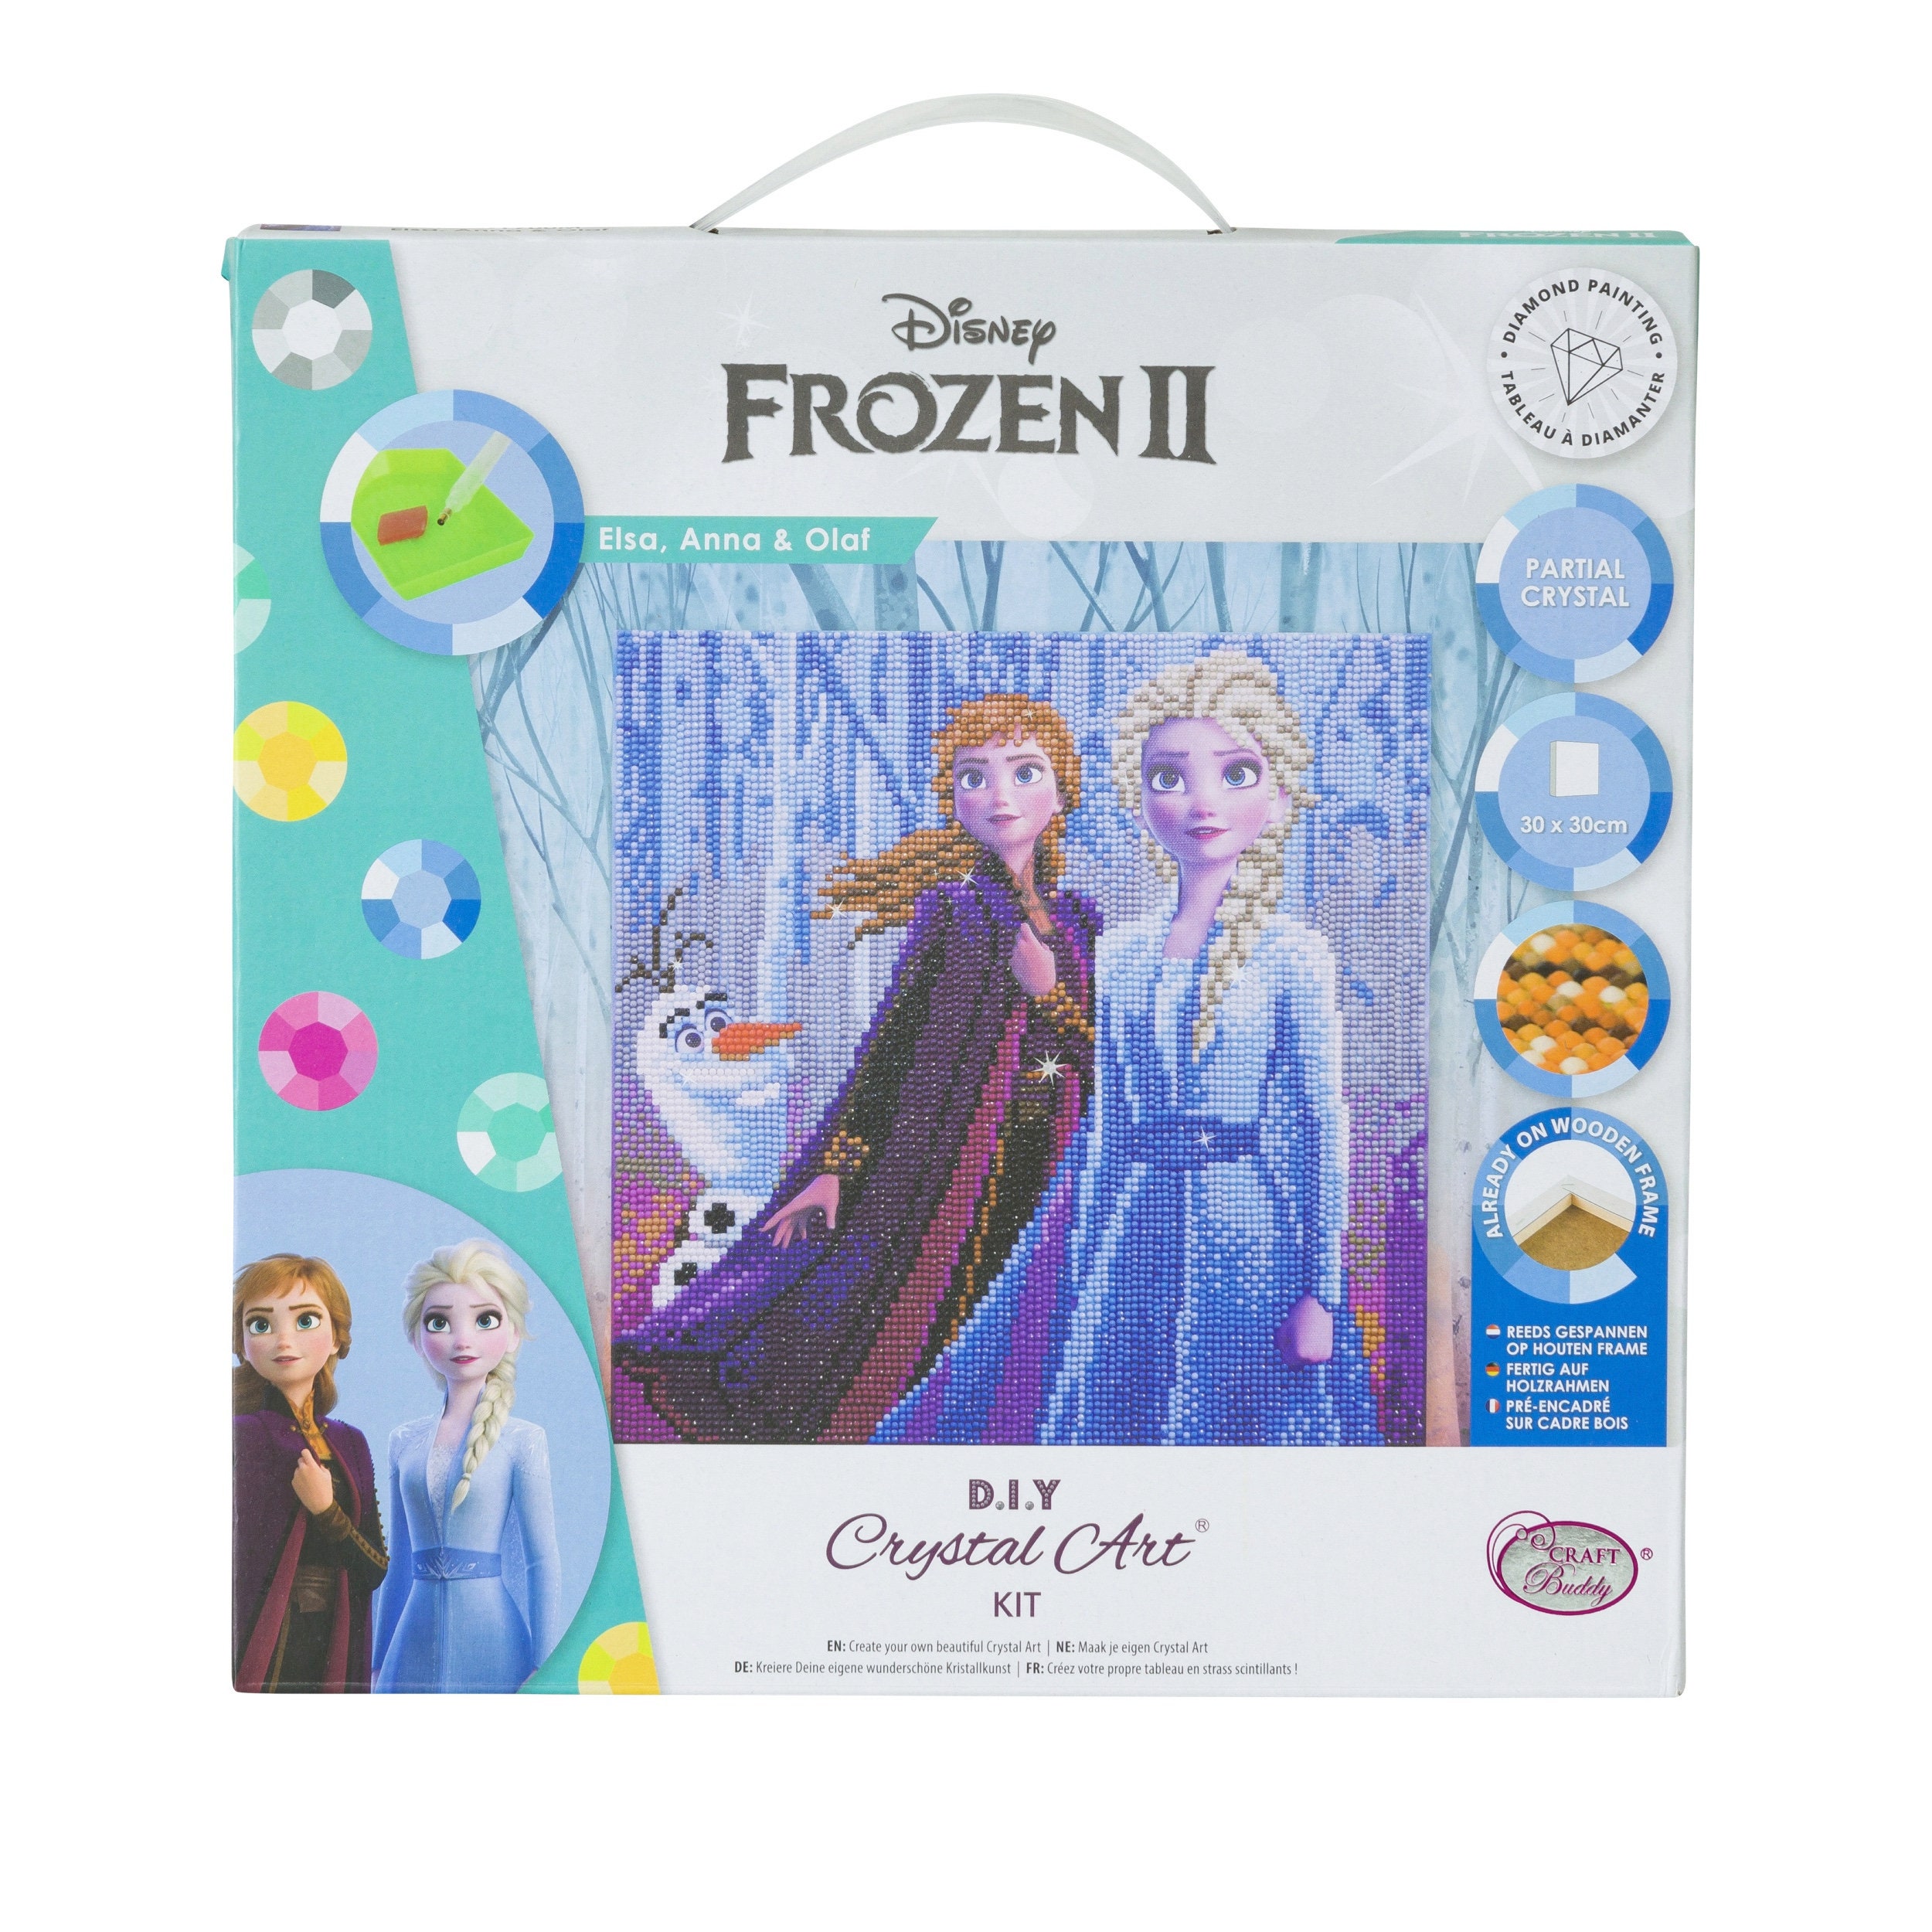 X Like DIY - Once 30 Buddy, Cm Ready Craft Disney Frozen Hong Kong Painting Picture Elsa Etsy Diamond Olaf Crystal Complete, Kit Anna to by Hang Art & 30